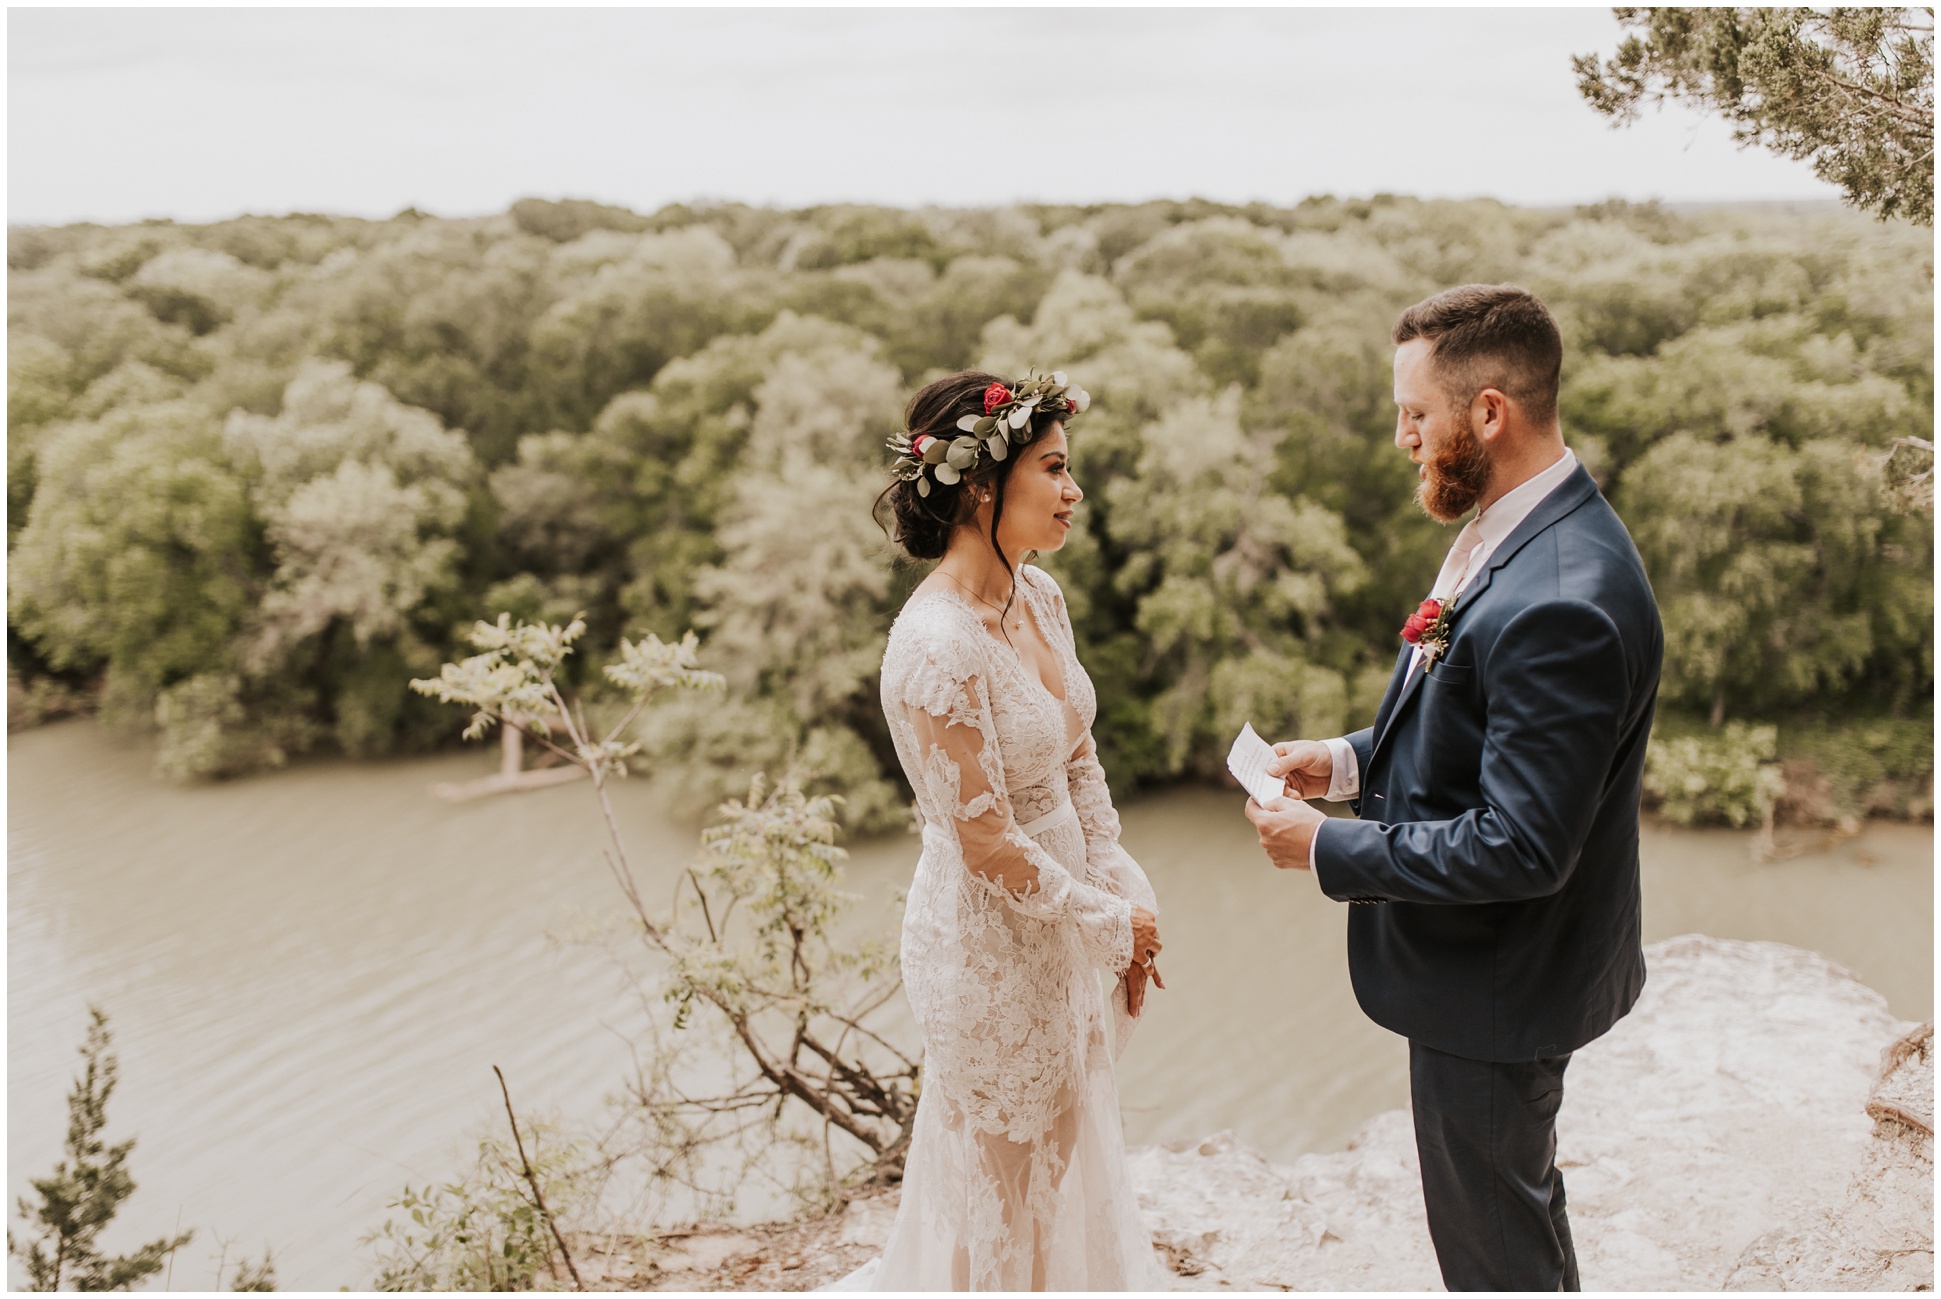 Exchanging vows near Brazos River in Waco, Texas